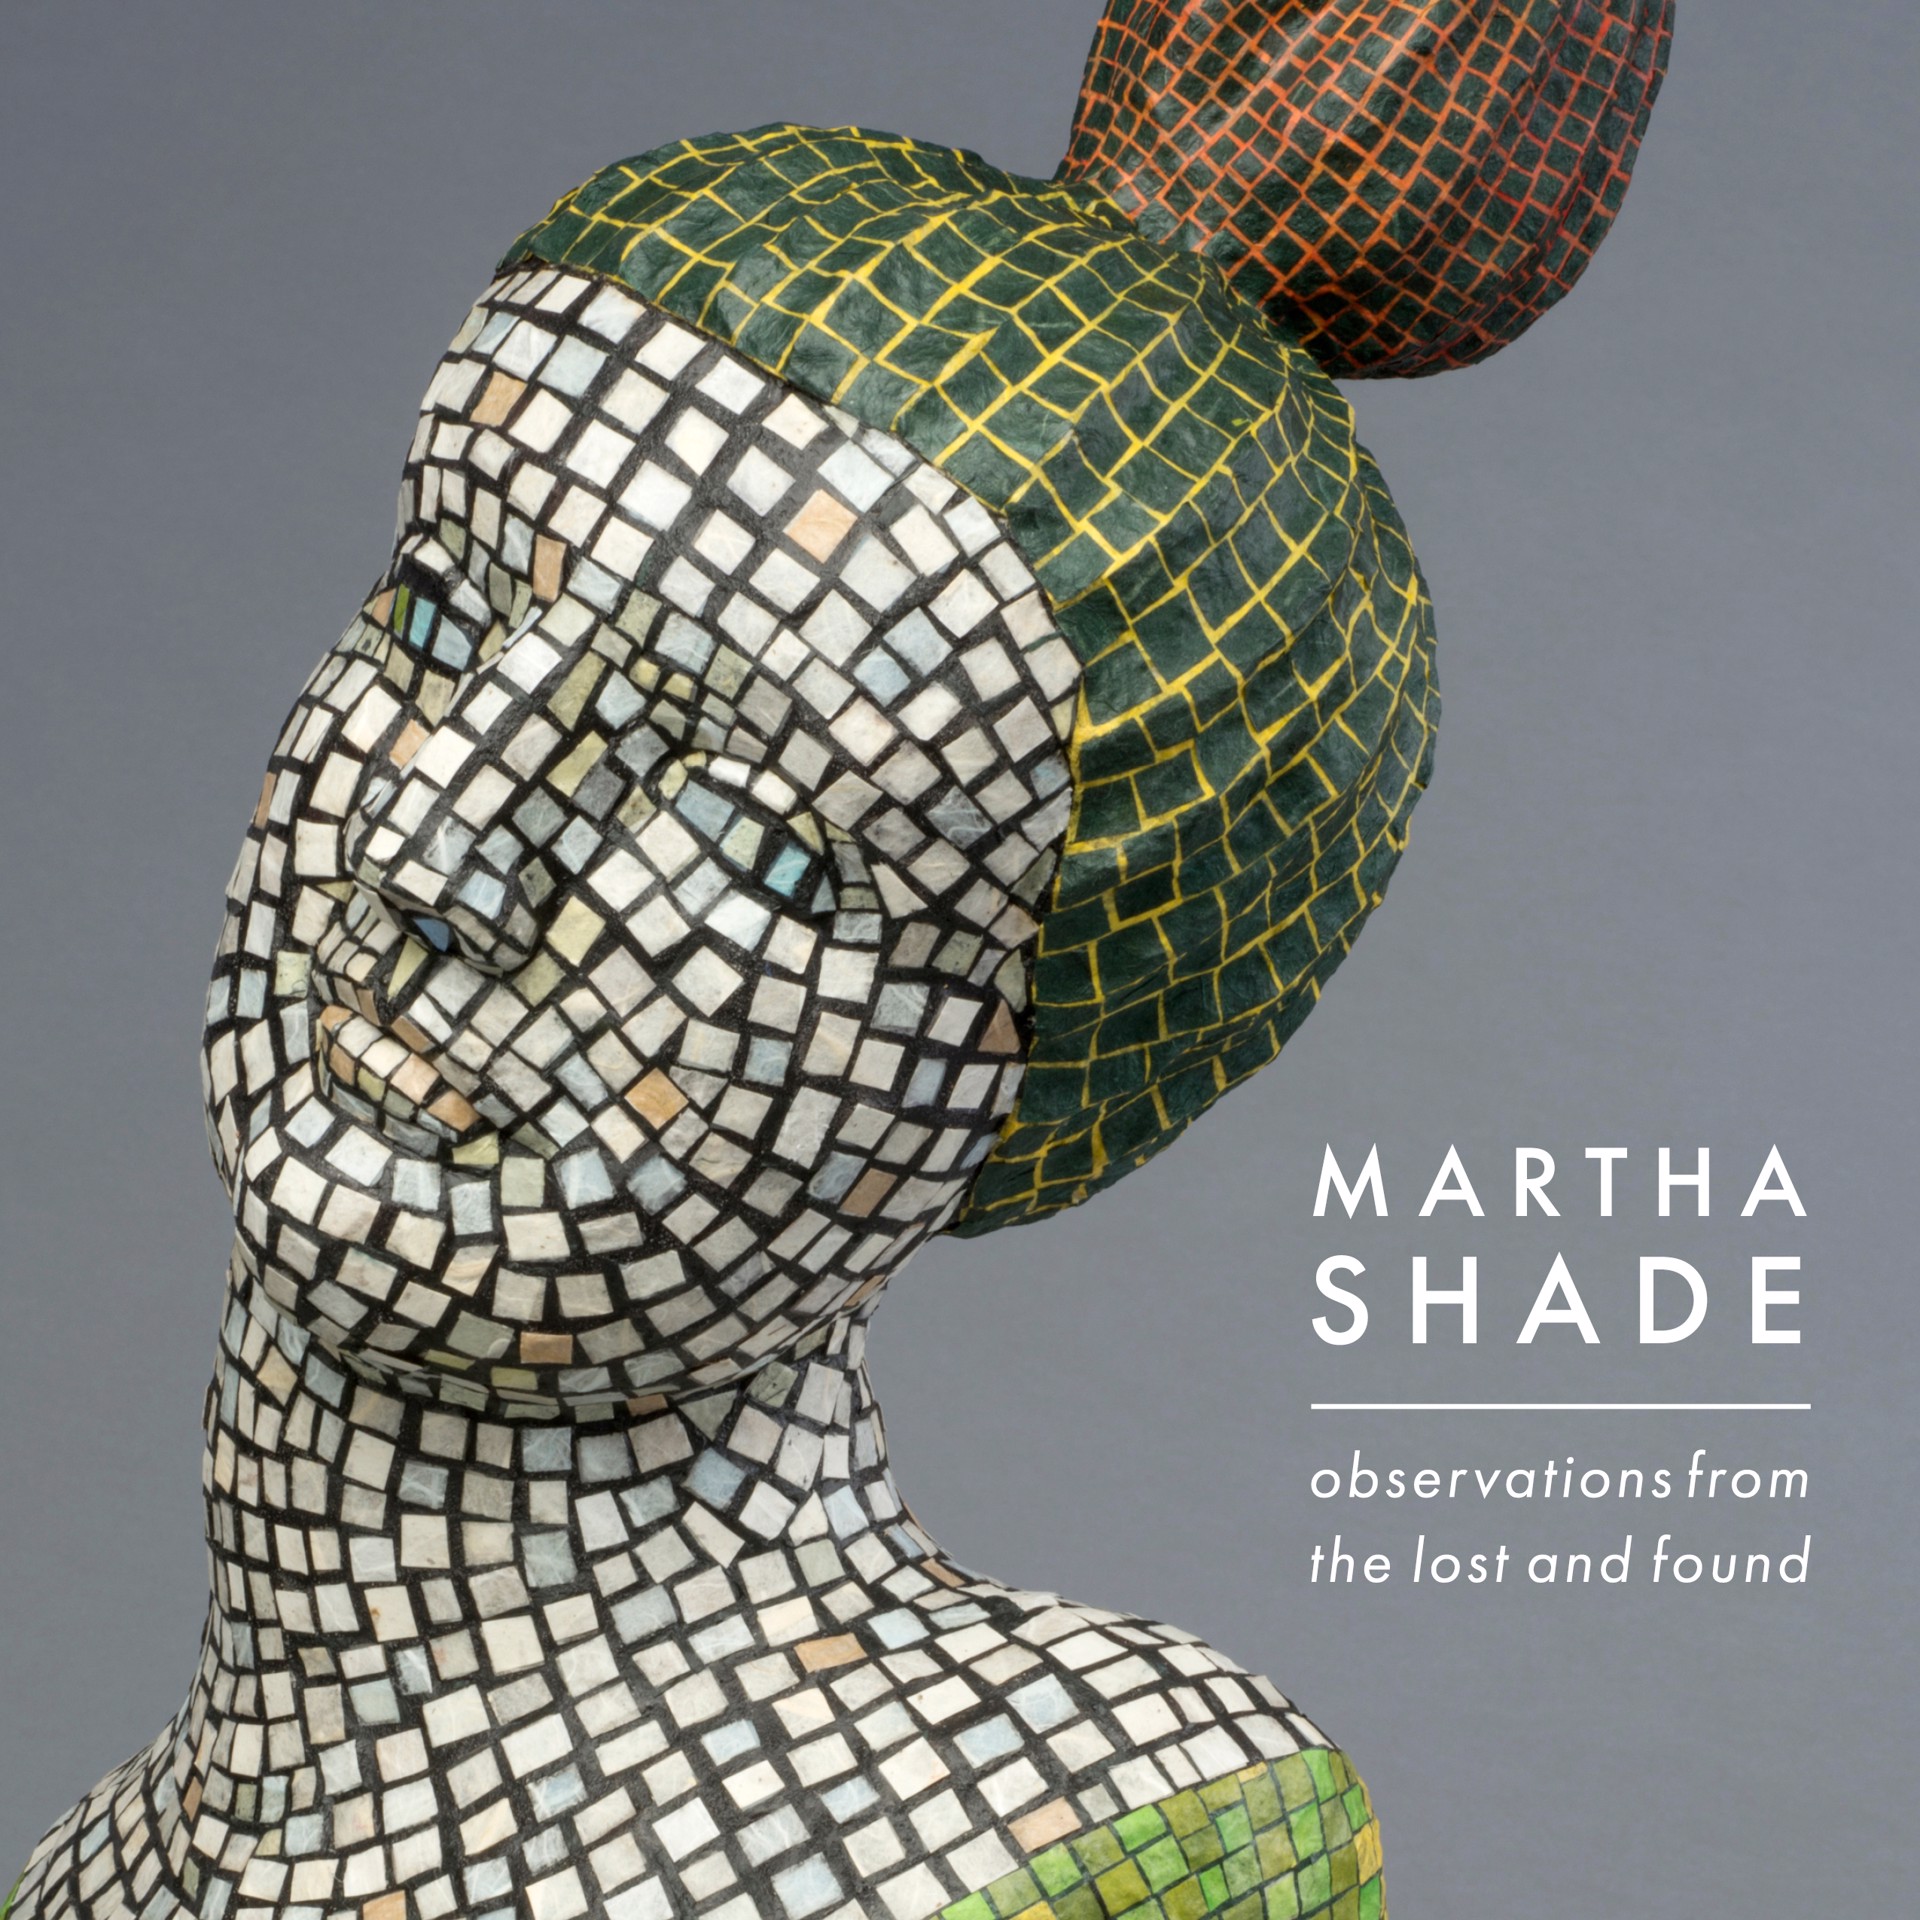 Observations from the Lost and Found | exhibition catalog by Martha Shade